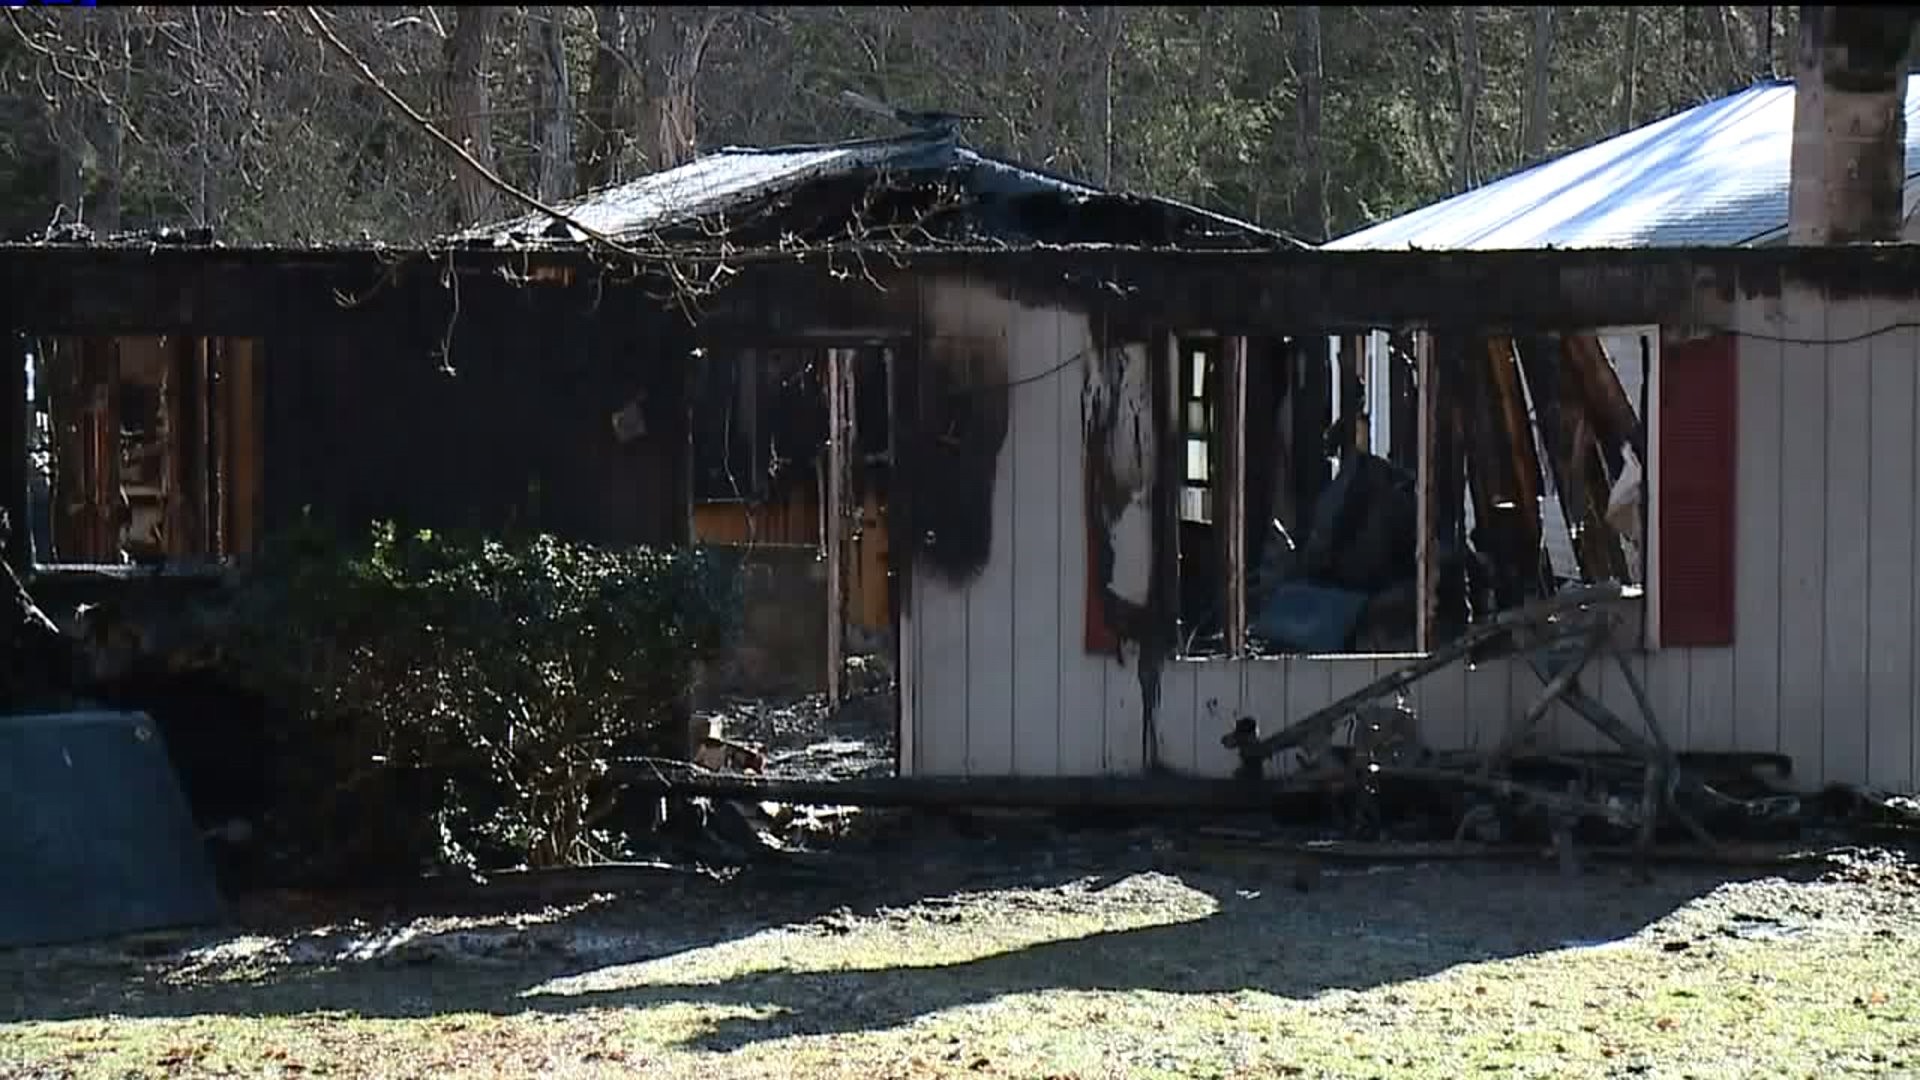 Home in Tobyhanna Damaged by Flames